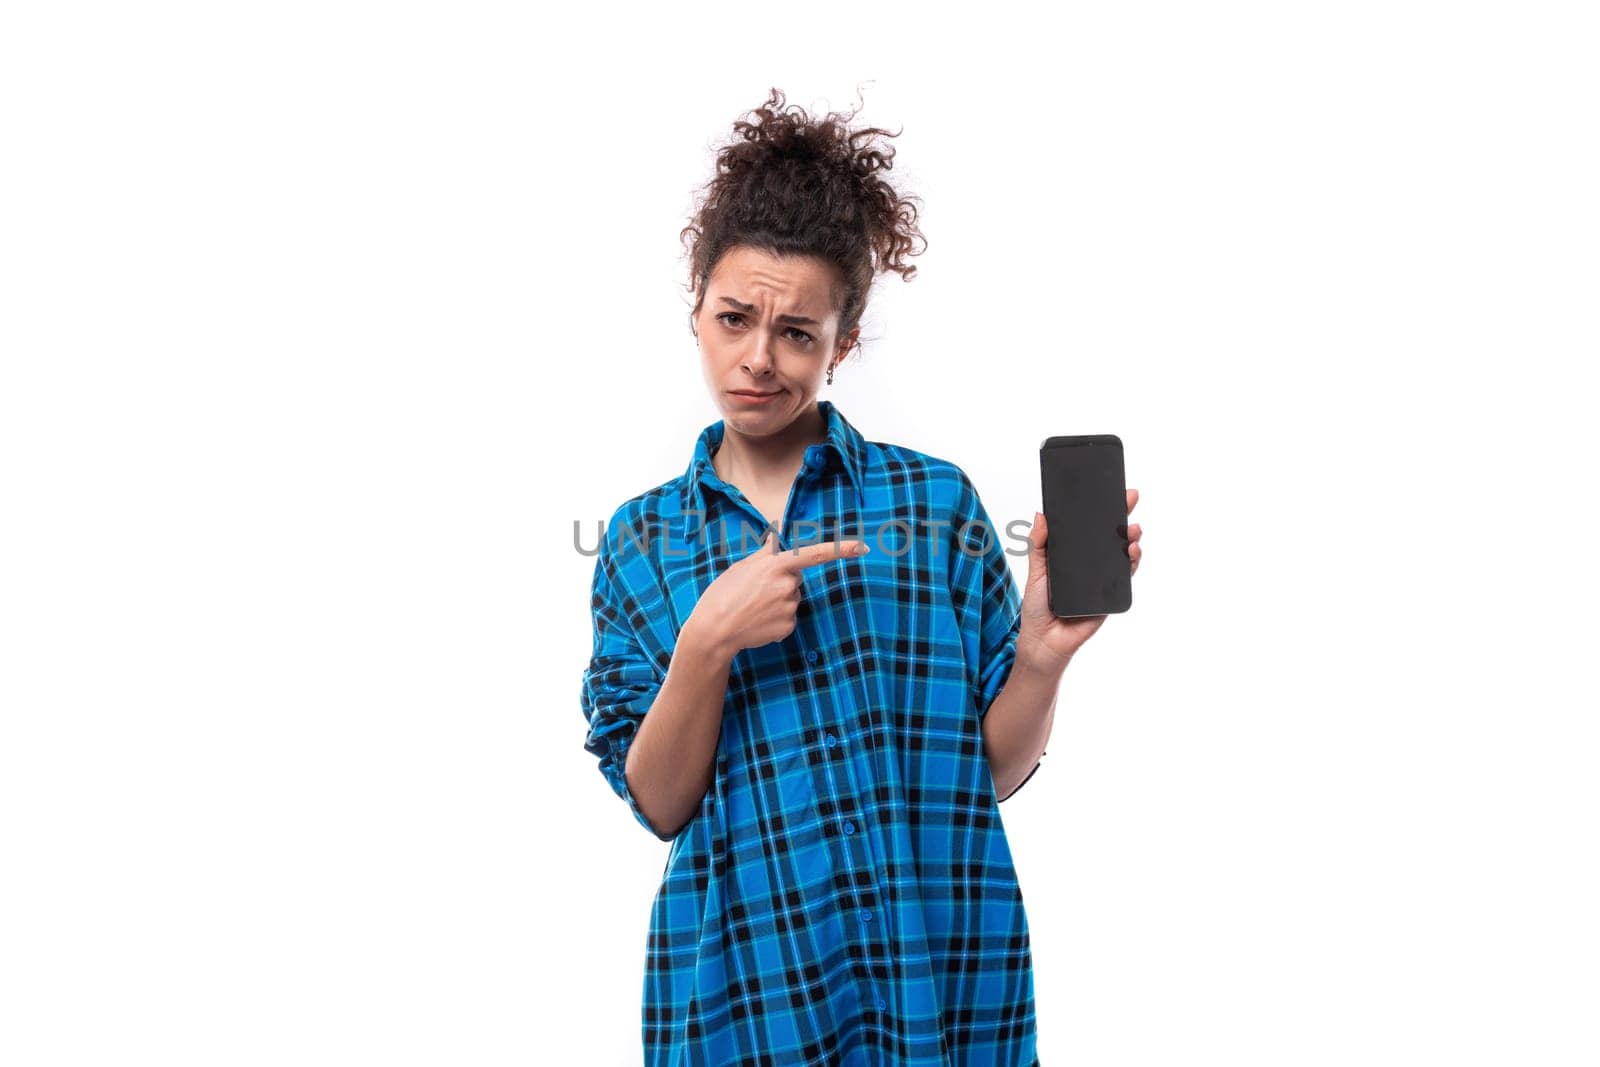 european young lady with curly ponytail hair style showing ads on mobile phone.